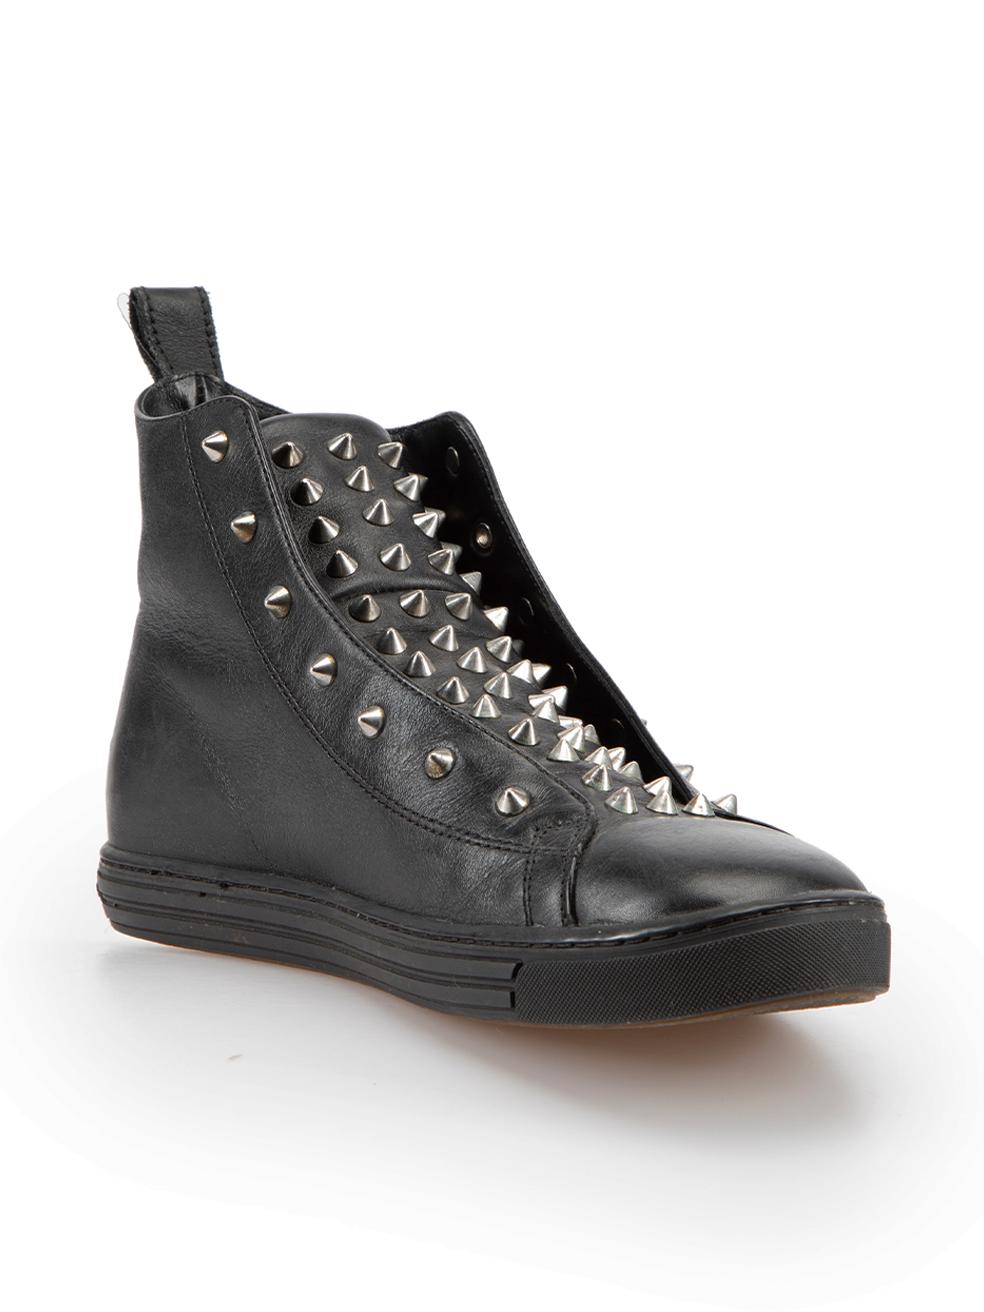 CONDITION is Very good. Minimal wear to shoes is evident. Minimal wear to the metal spikes with slight tarnishing on this used Dsquared2 designer resale item. These shoes come with original box and dust bag.



Details


Black

Leather

High top